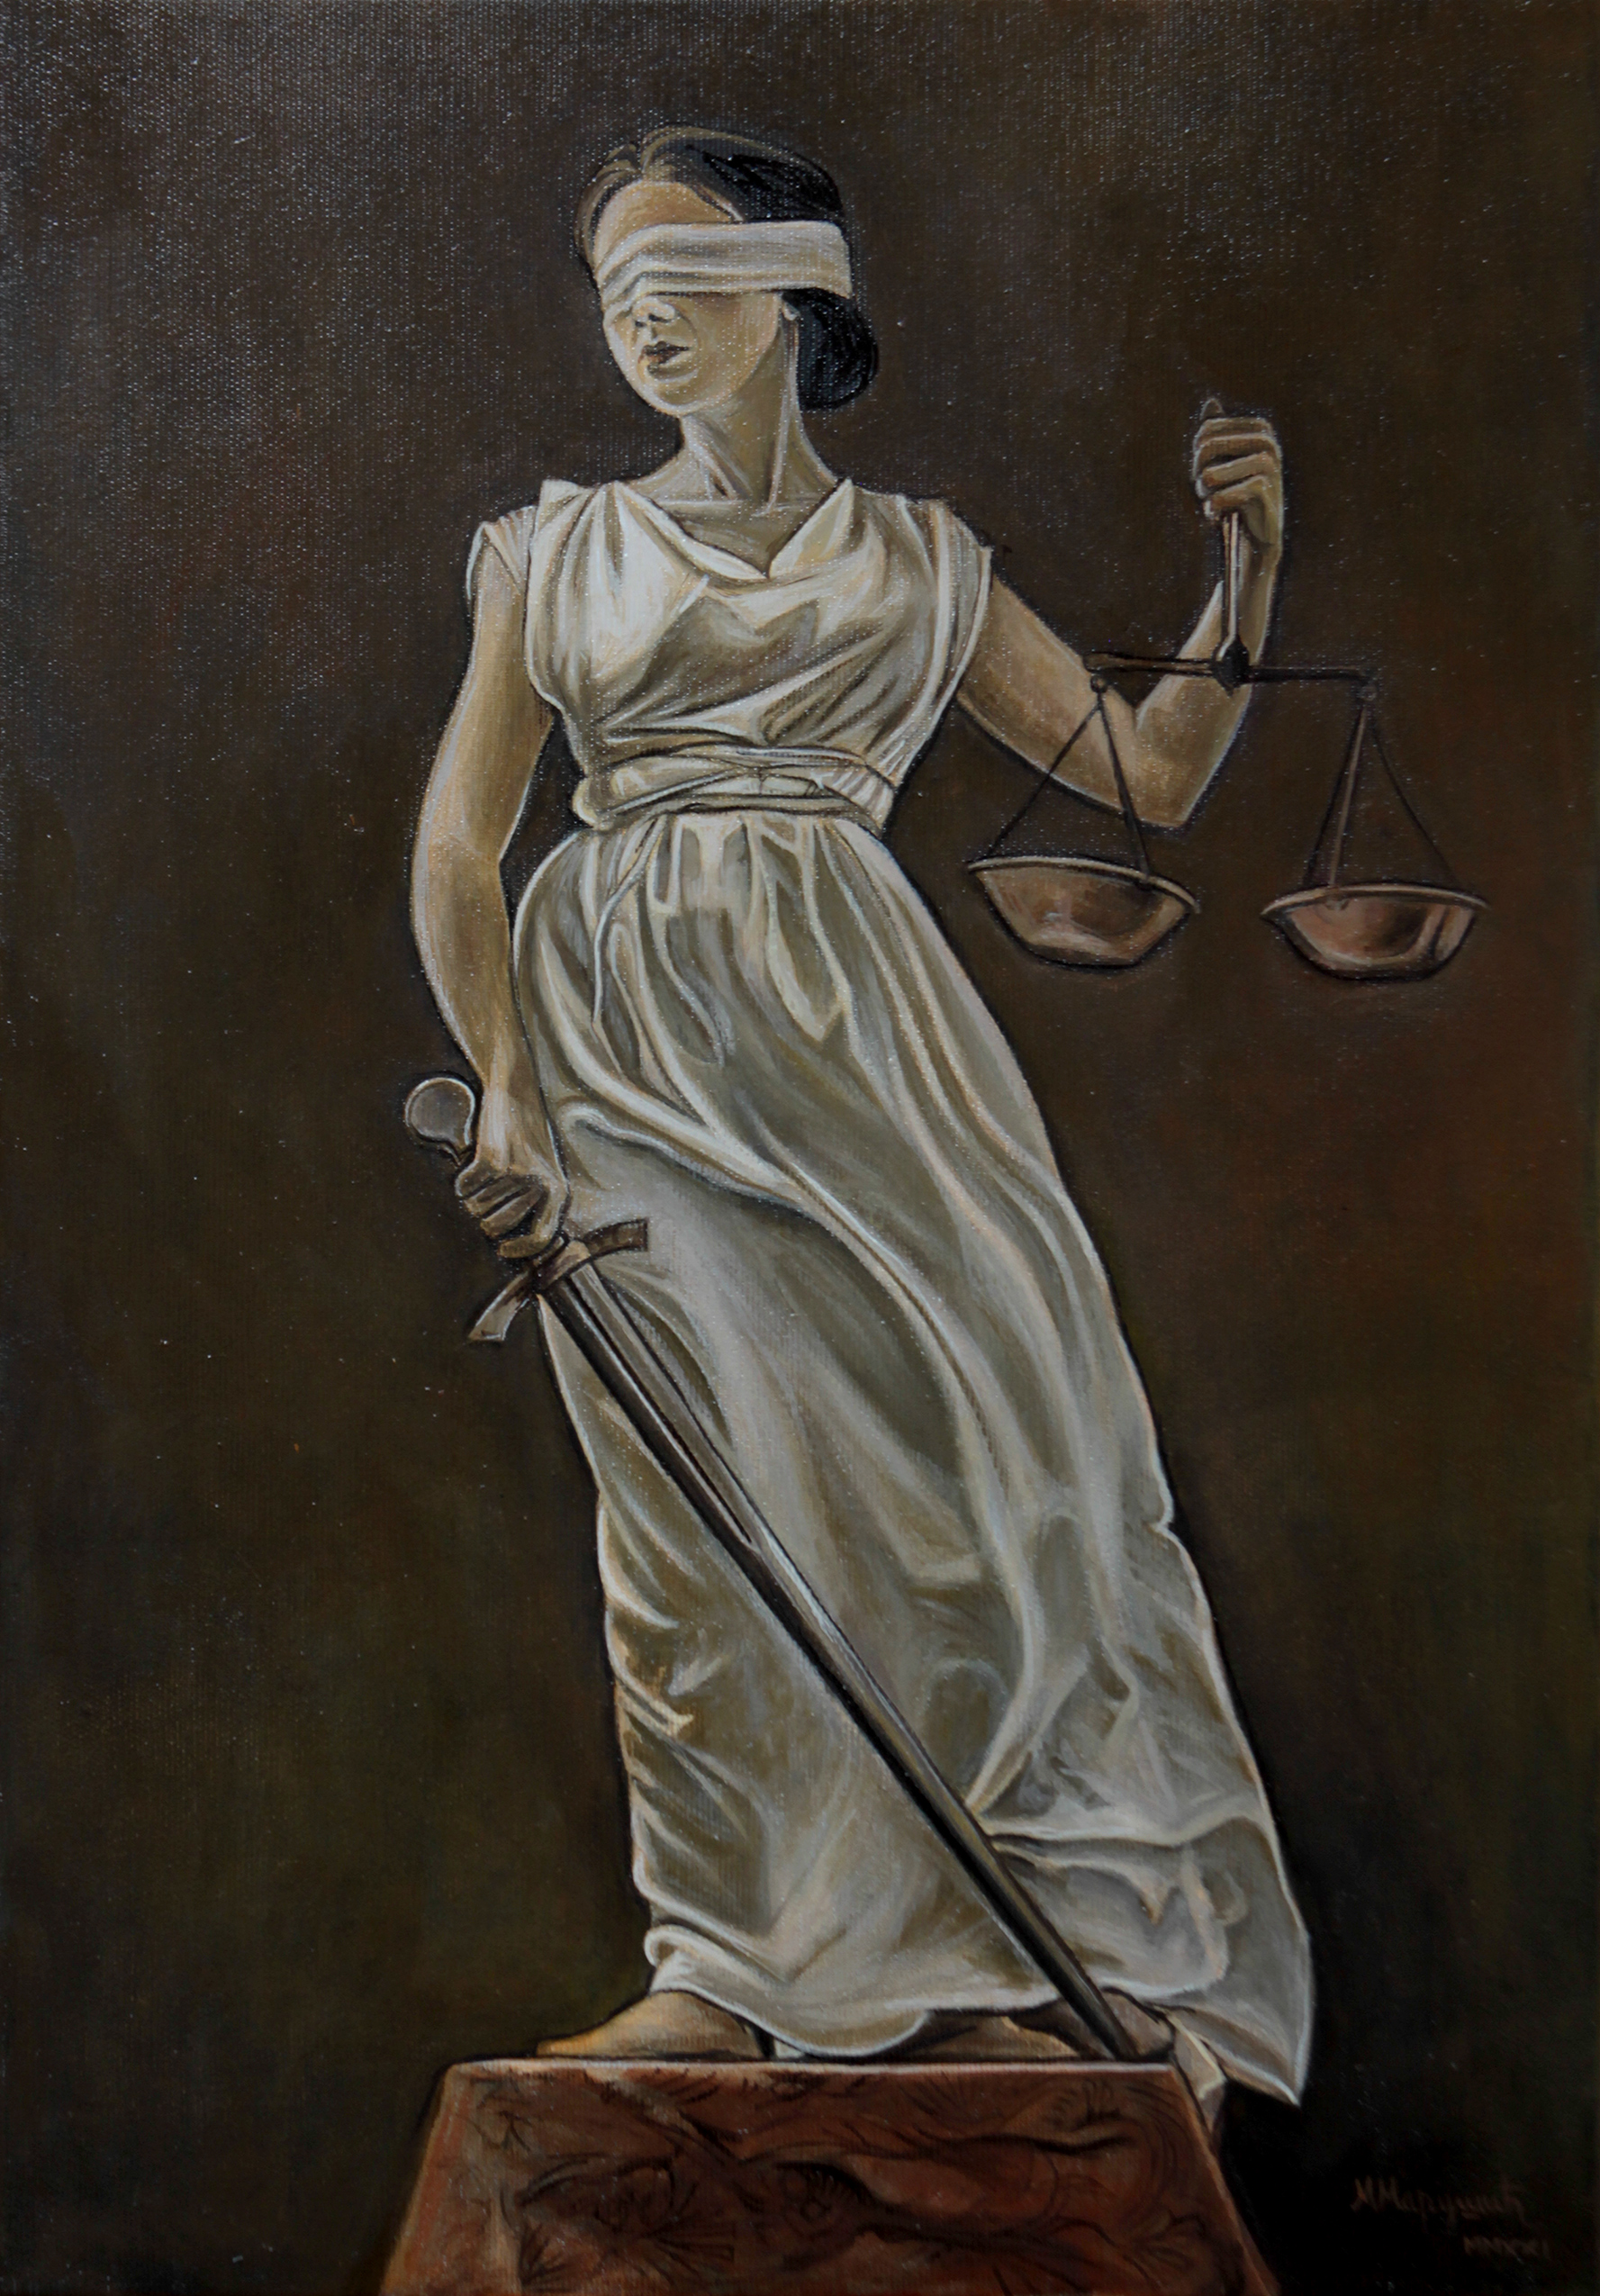 Lady Justice - Oil Painting on Canvas - 50x35cm 2021 Original Artwork by artist Milica Marusic Art